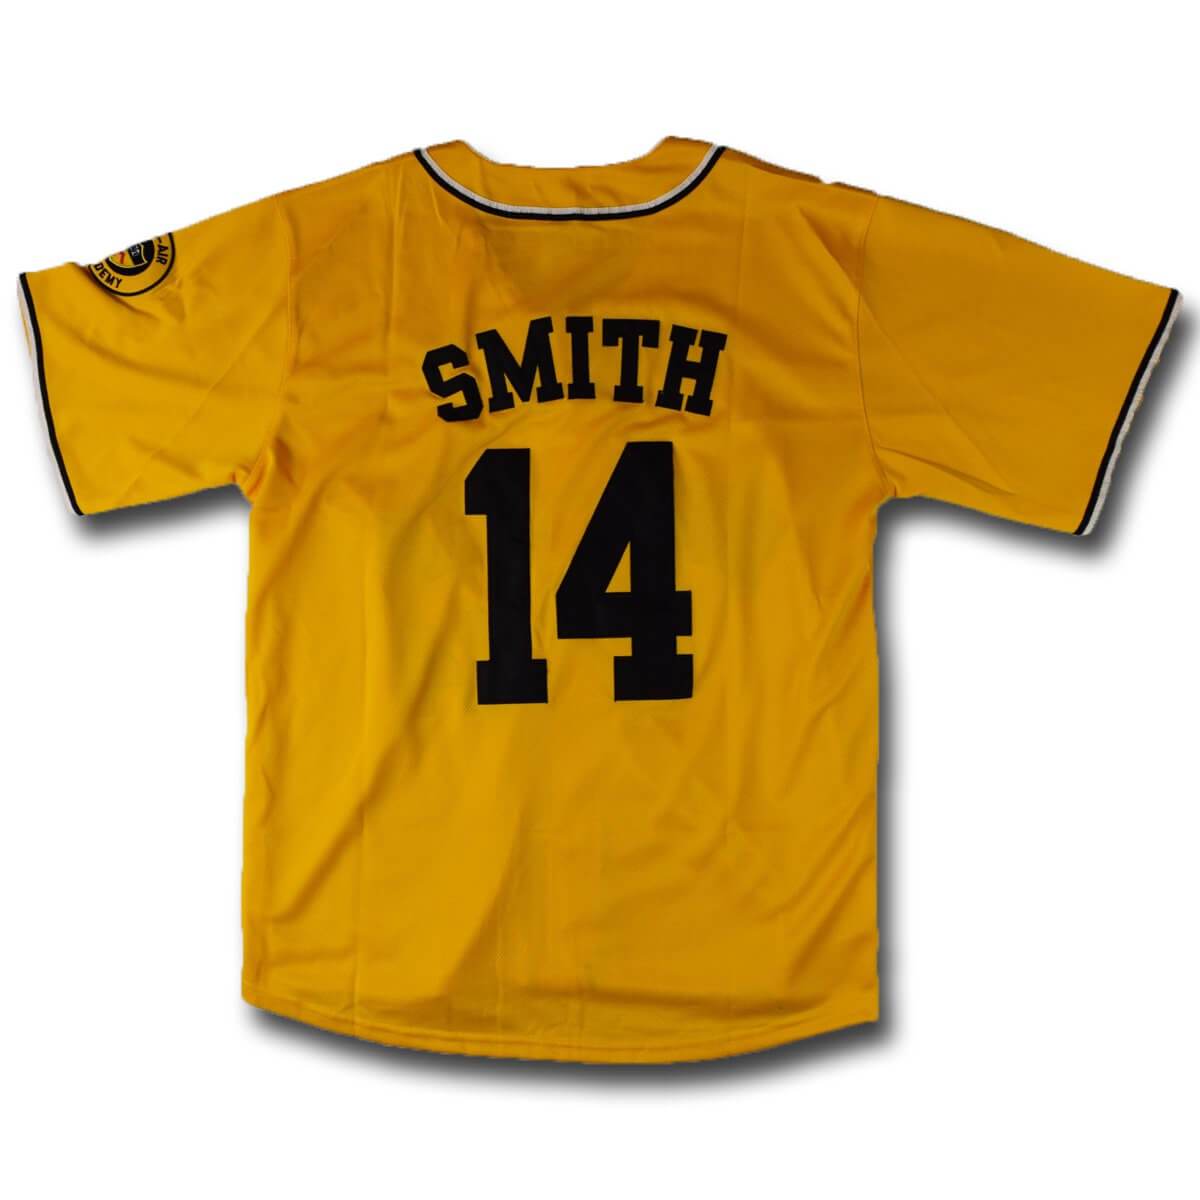 Fresh Prince of Bel Air Baseball Jersey Will Smith #14, S